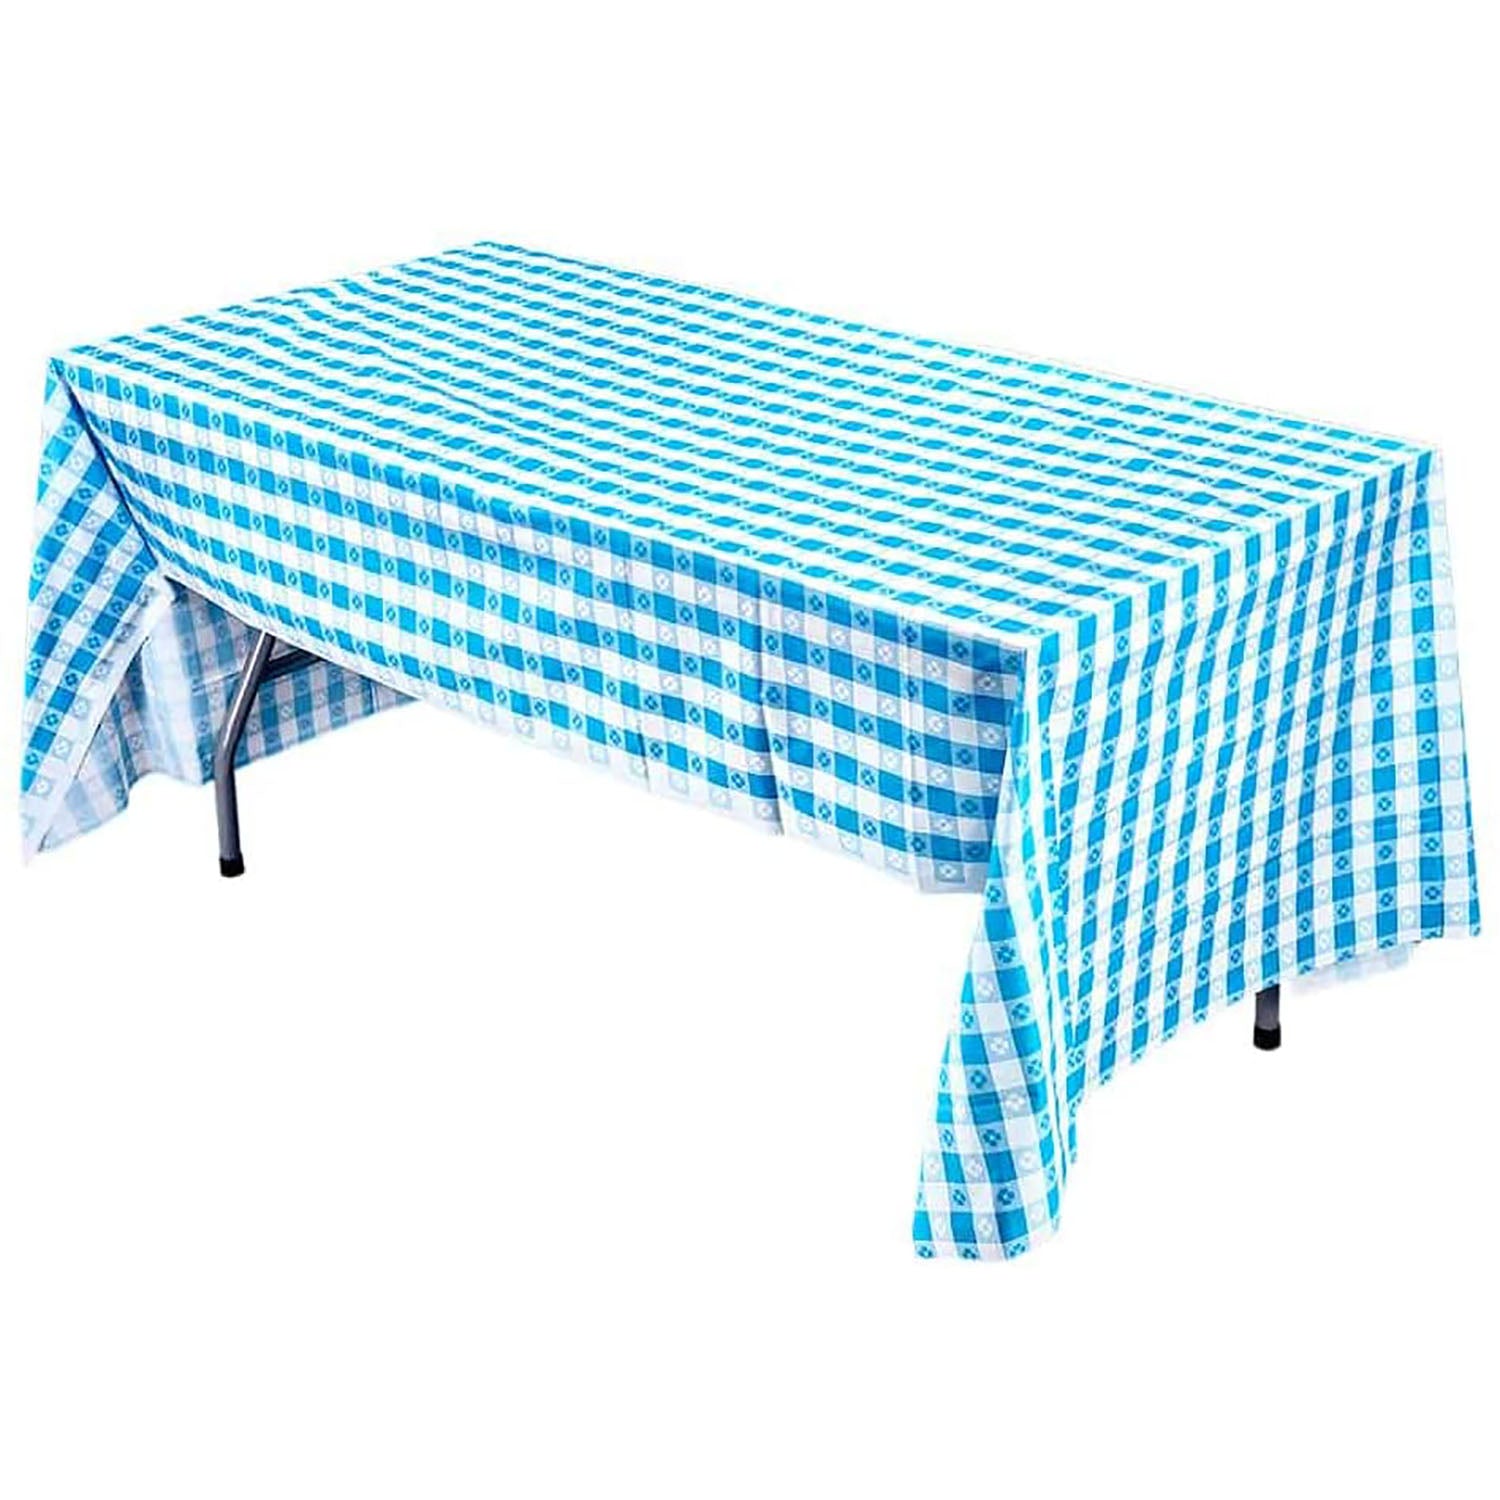 Tablecover Plastic Blue Gingham Rectangular  54'' X 108'' Tablesettings Party Dimensions   